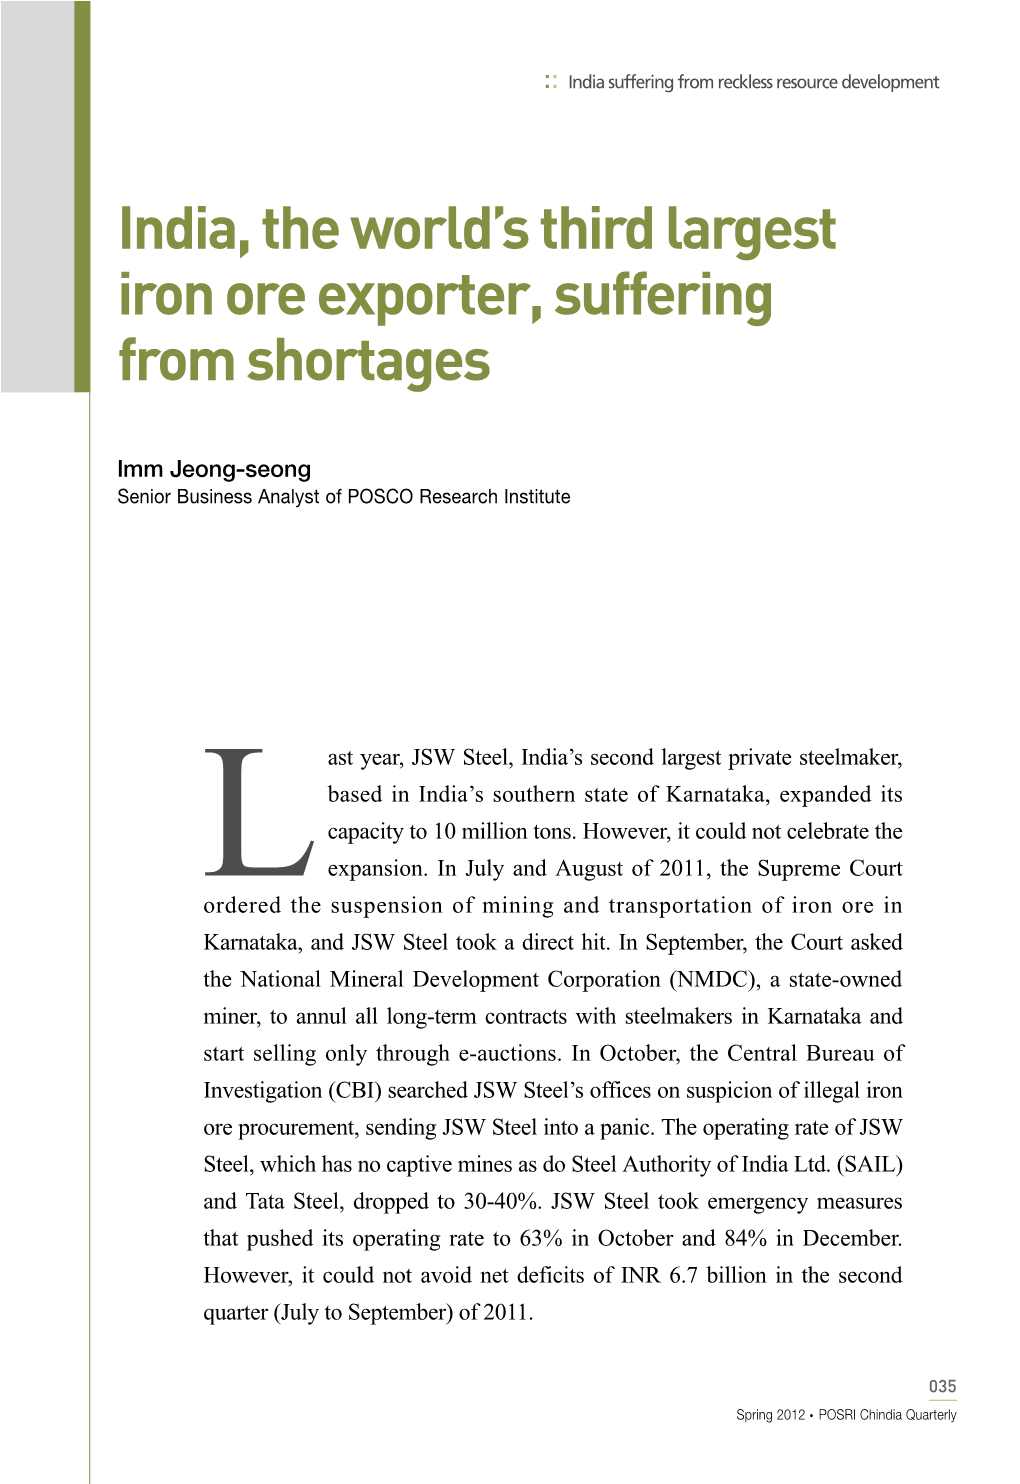 India, the World's Third Largest Iron Ore Exporter, Suffering from Shortages